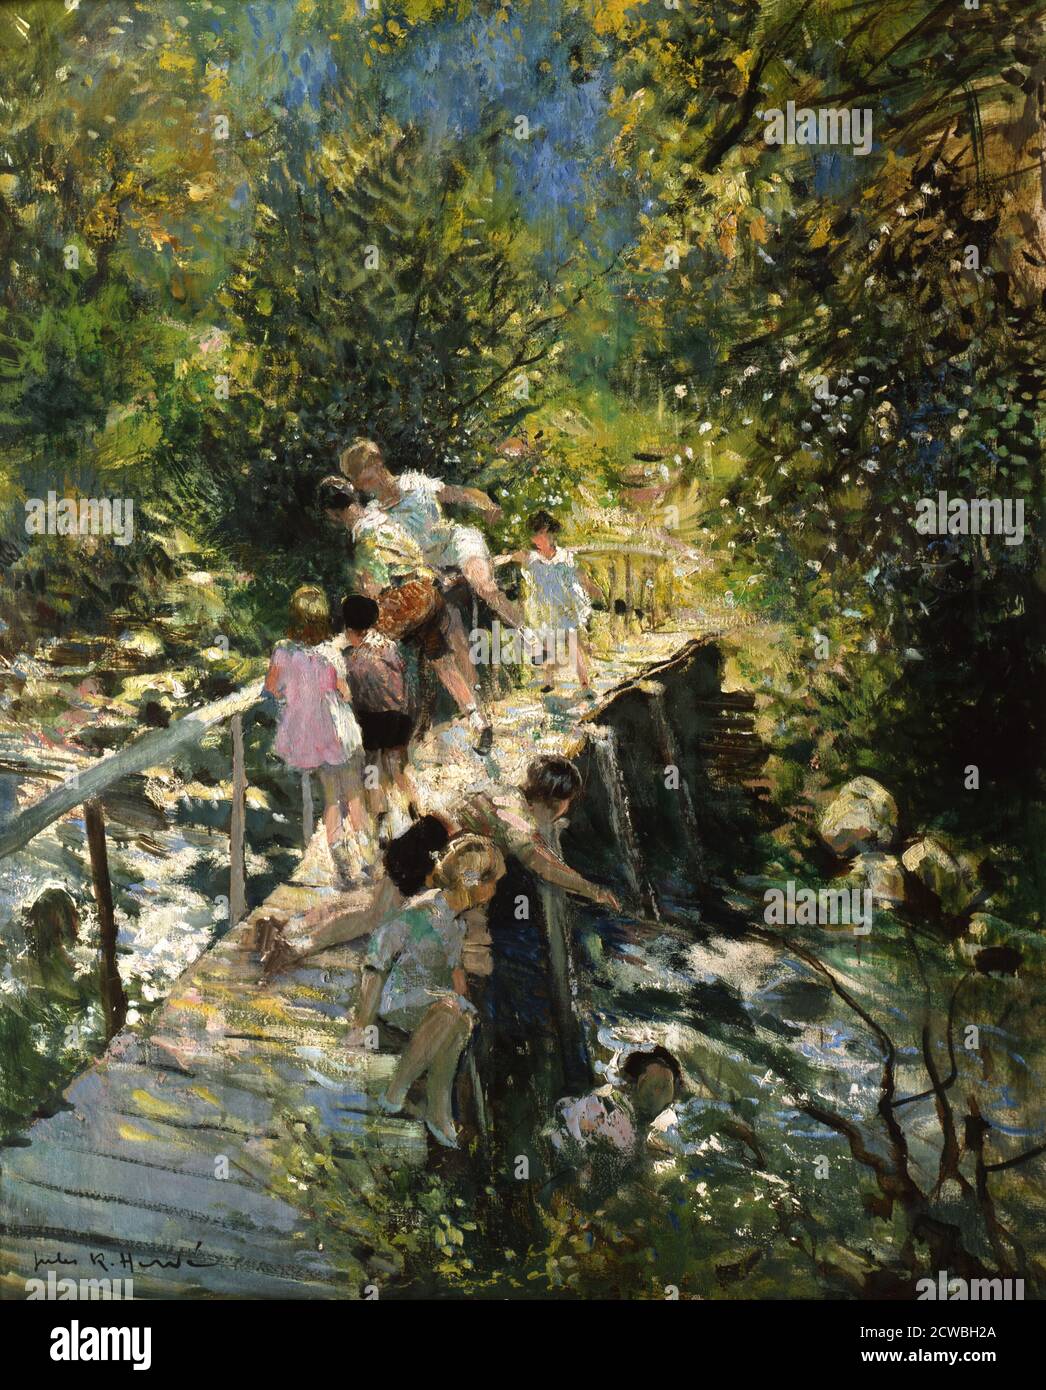 Playing By the Stream, circa 1930 by Jules Rene Herve, French impressionist painter, 1887-1981. Oil on canvas Stock Photo